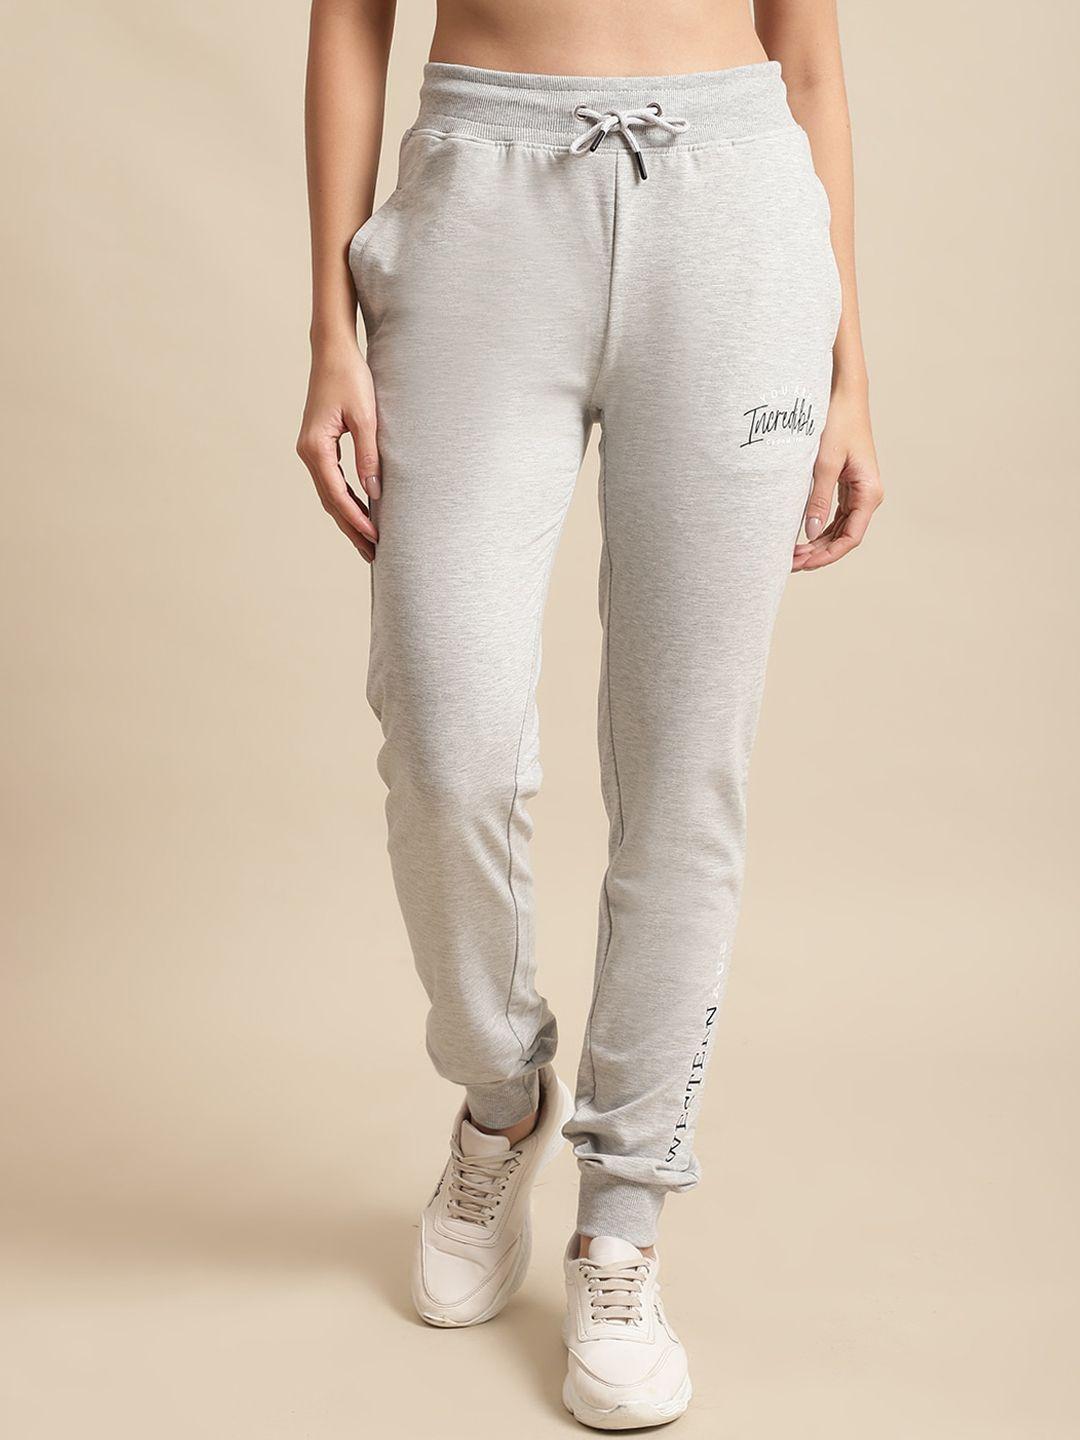 cantabil-women-printed-cotton-joggers